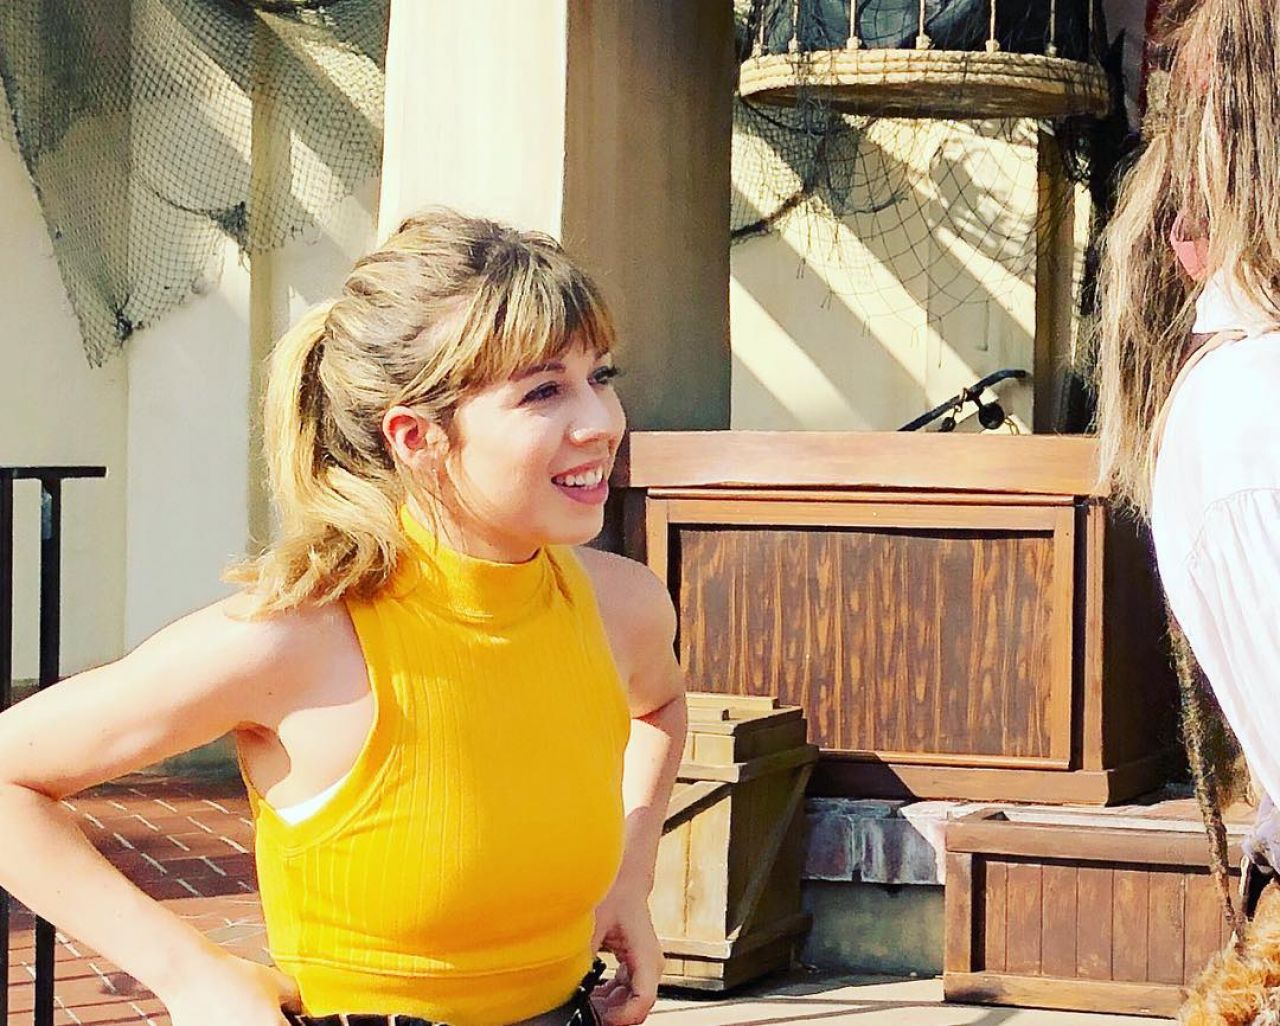 jennette-mccurdy-personal-pic-04-22-2019-1.jpg